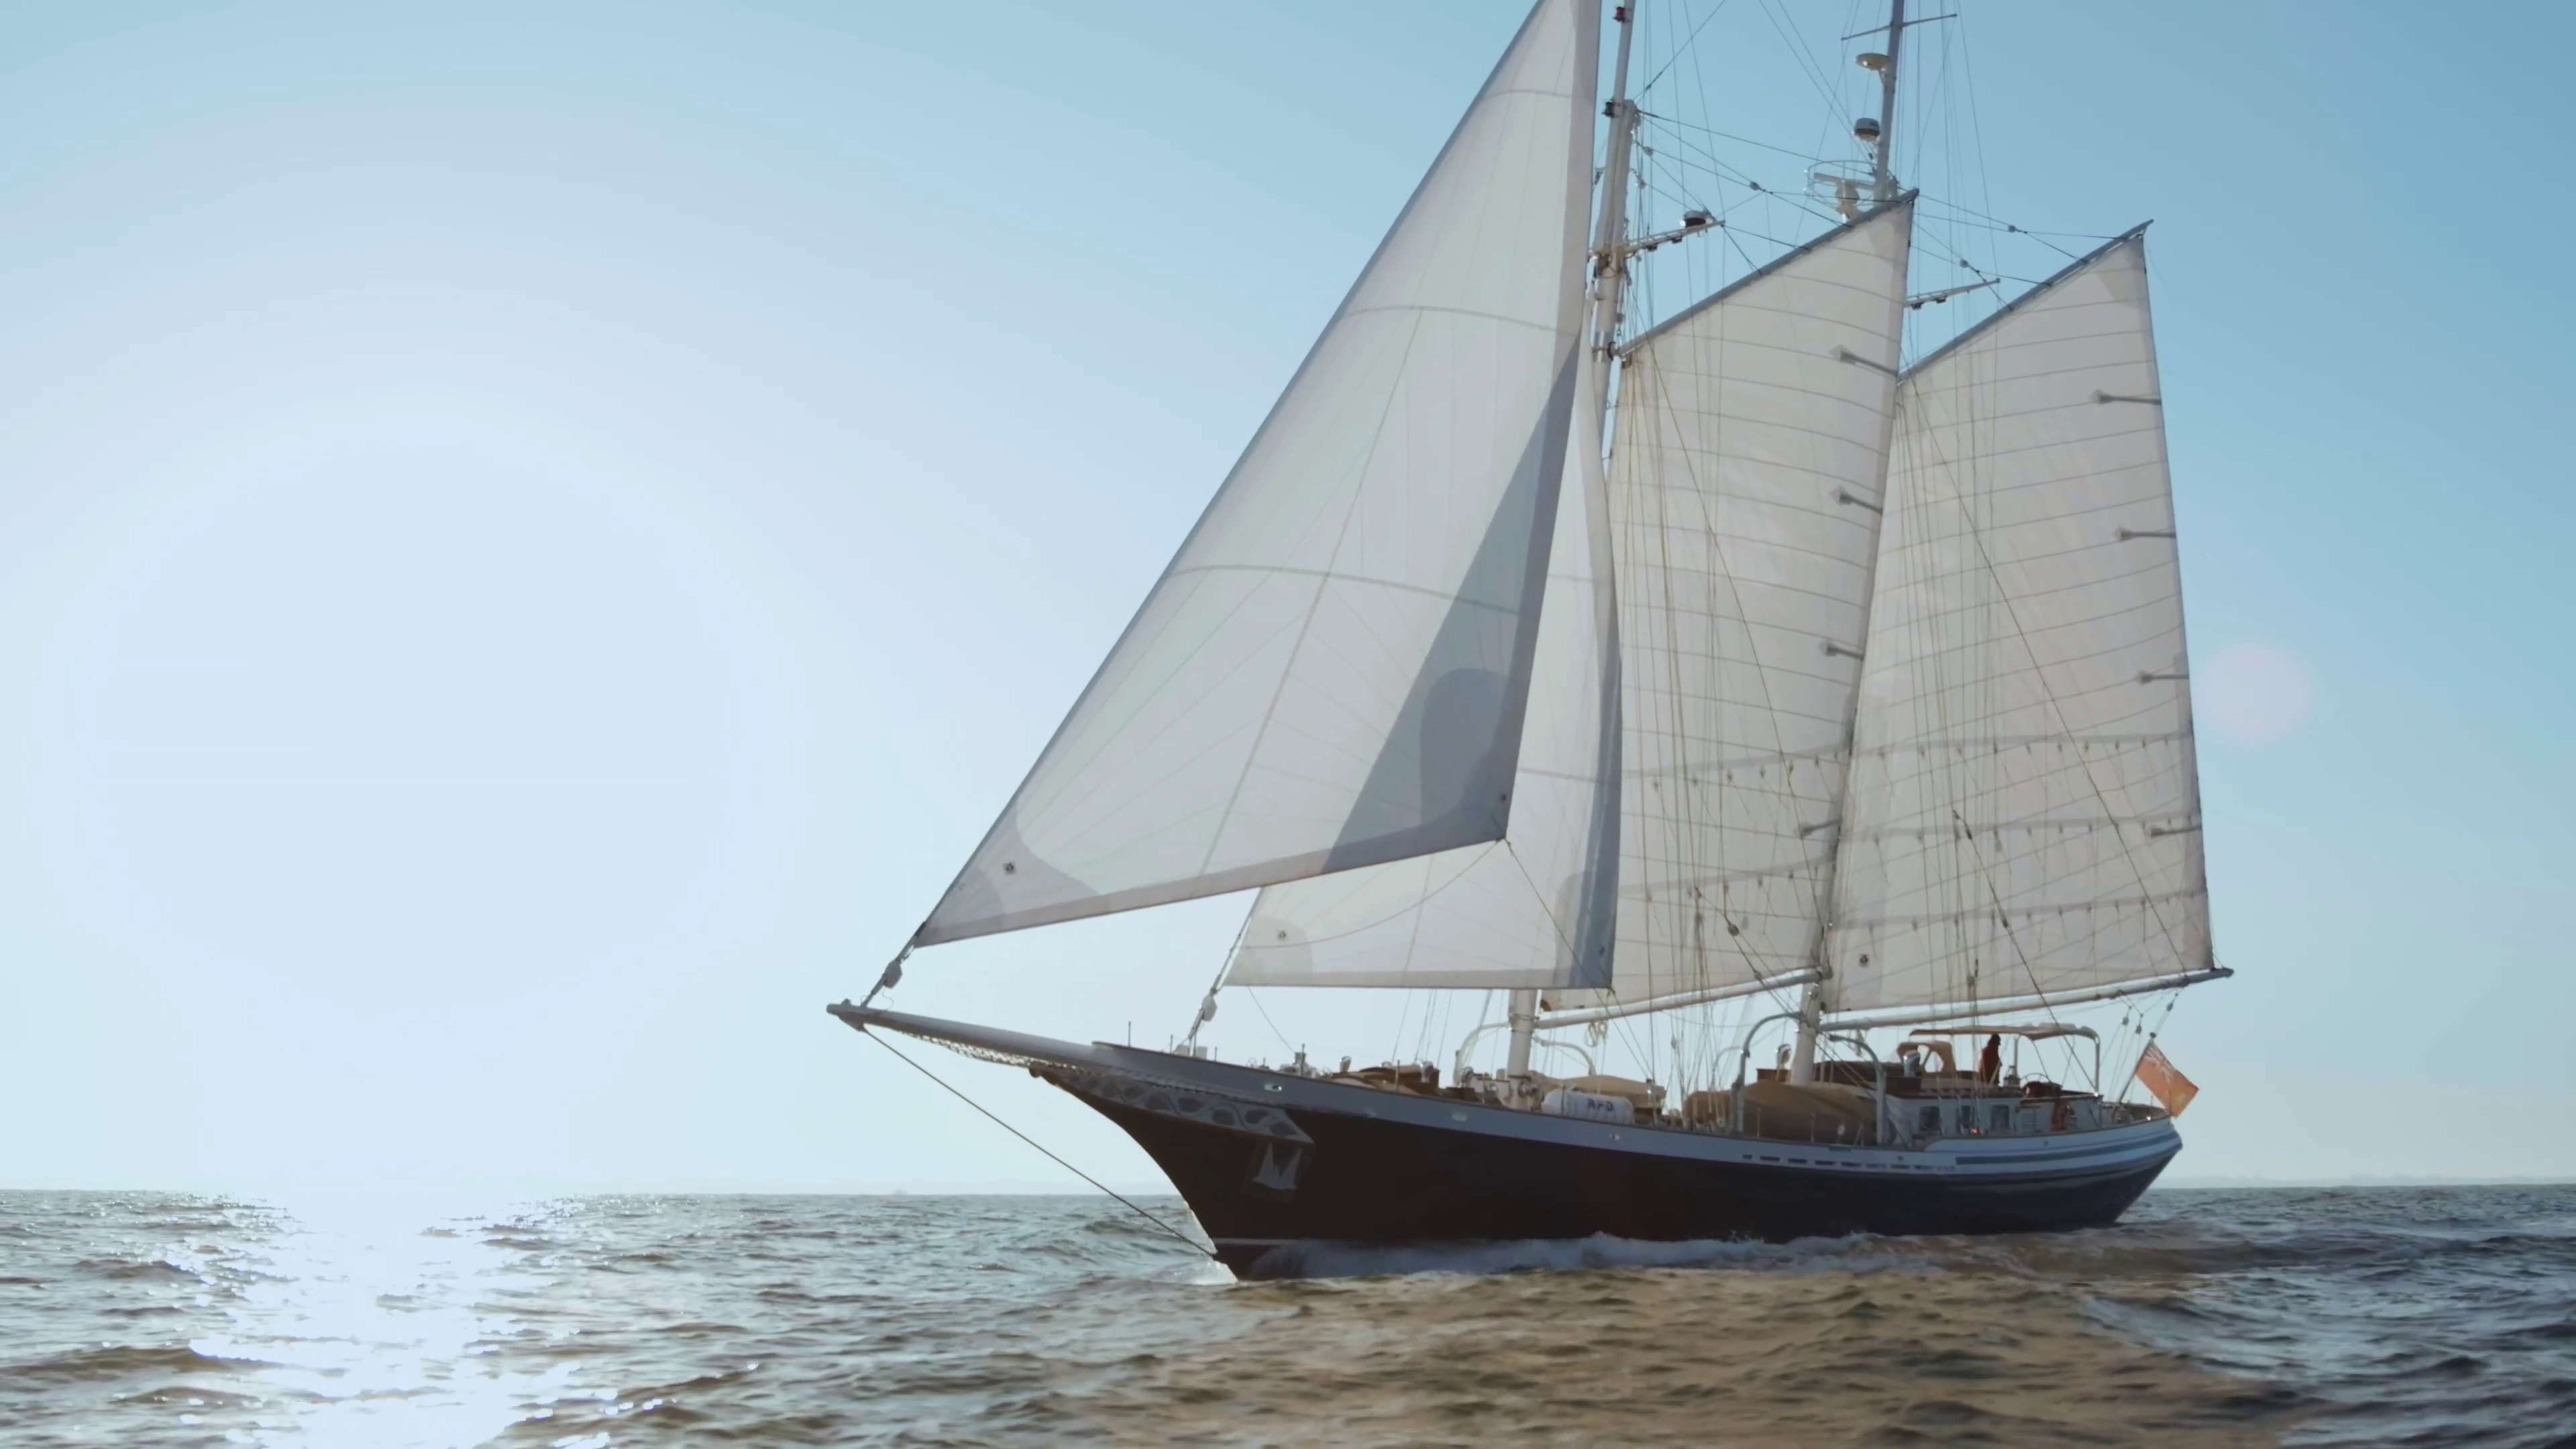 Schooner: Henk Lunstroo, The topsail vessel, Has a square topsail on the foremast. 3840x2160 4K Background.